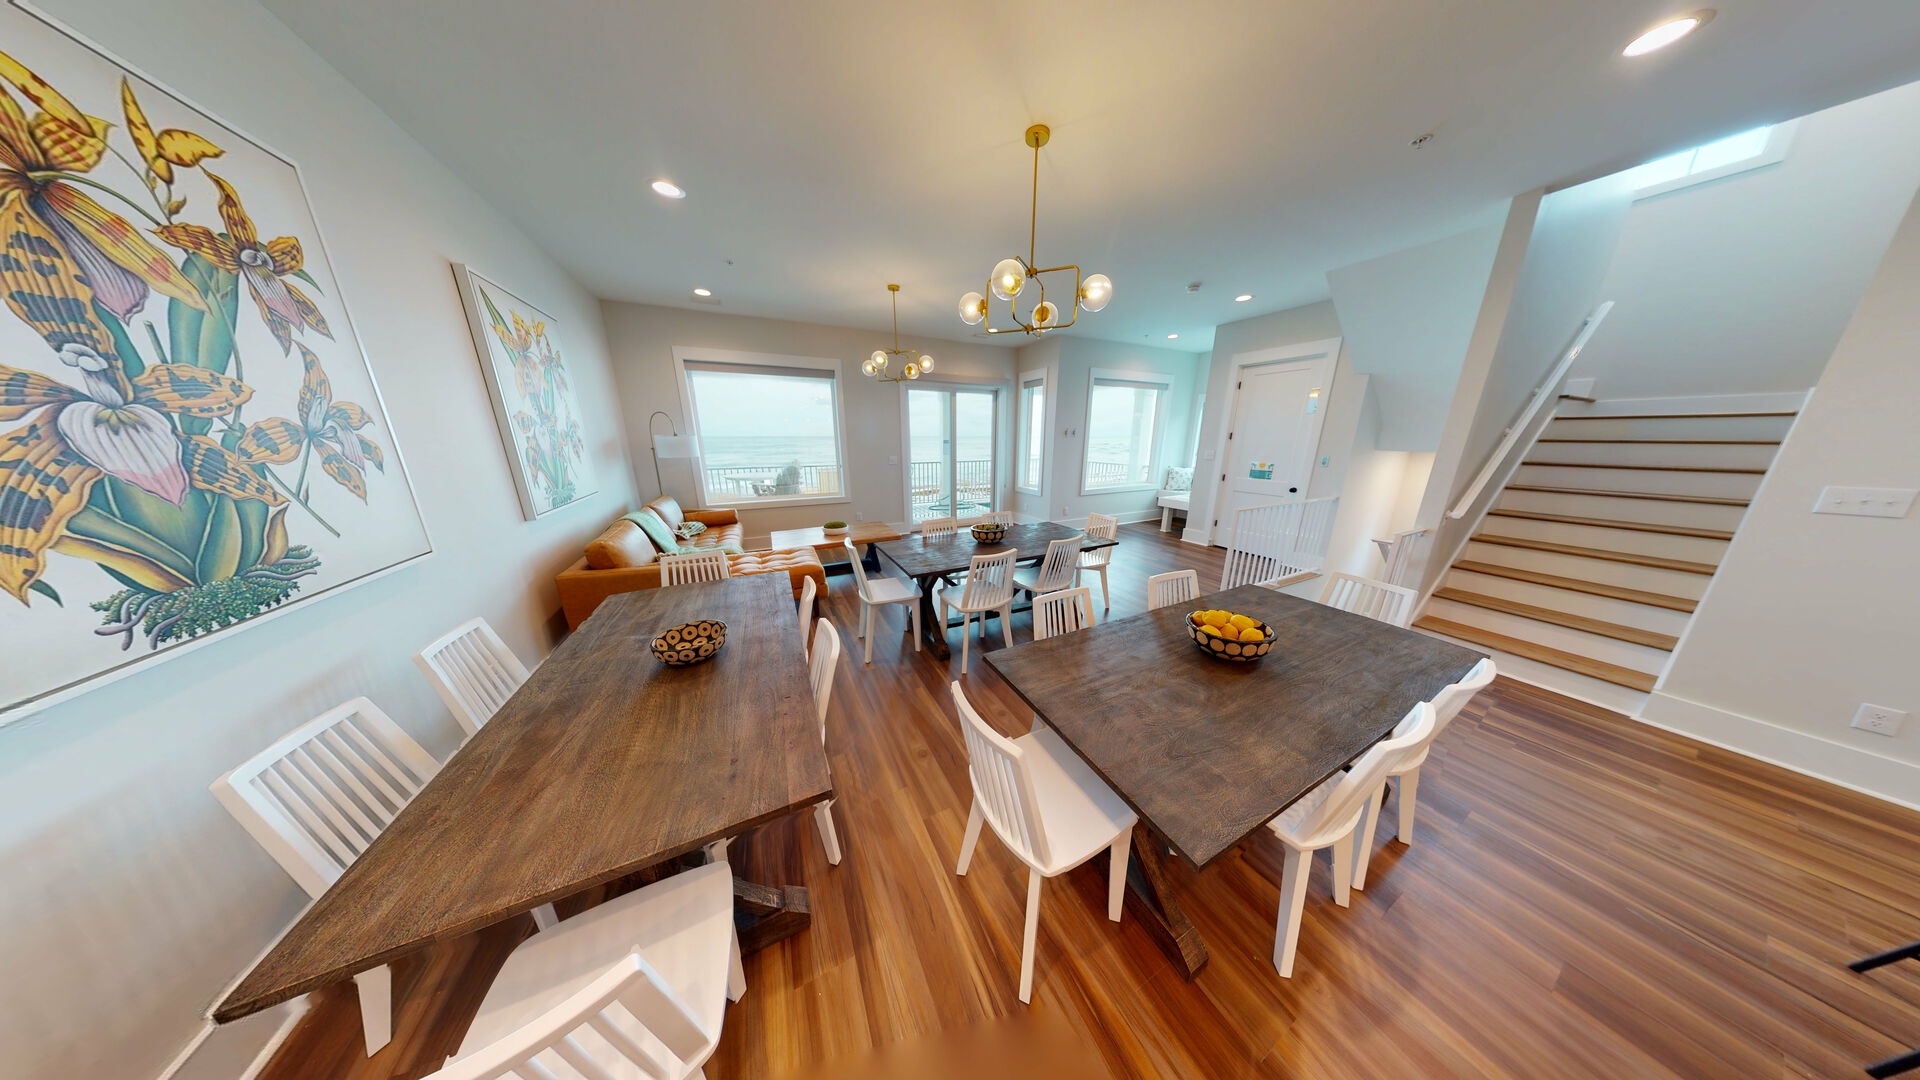 The home has 3 dining tables, great for family meals and game night